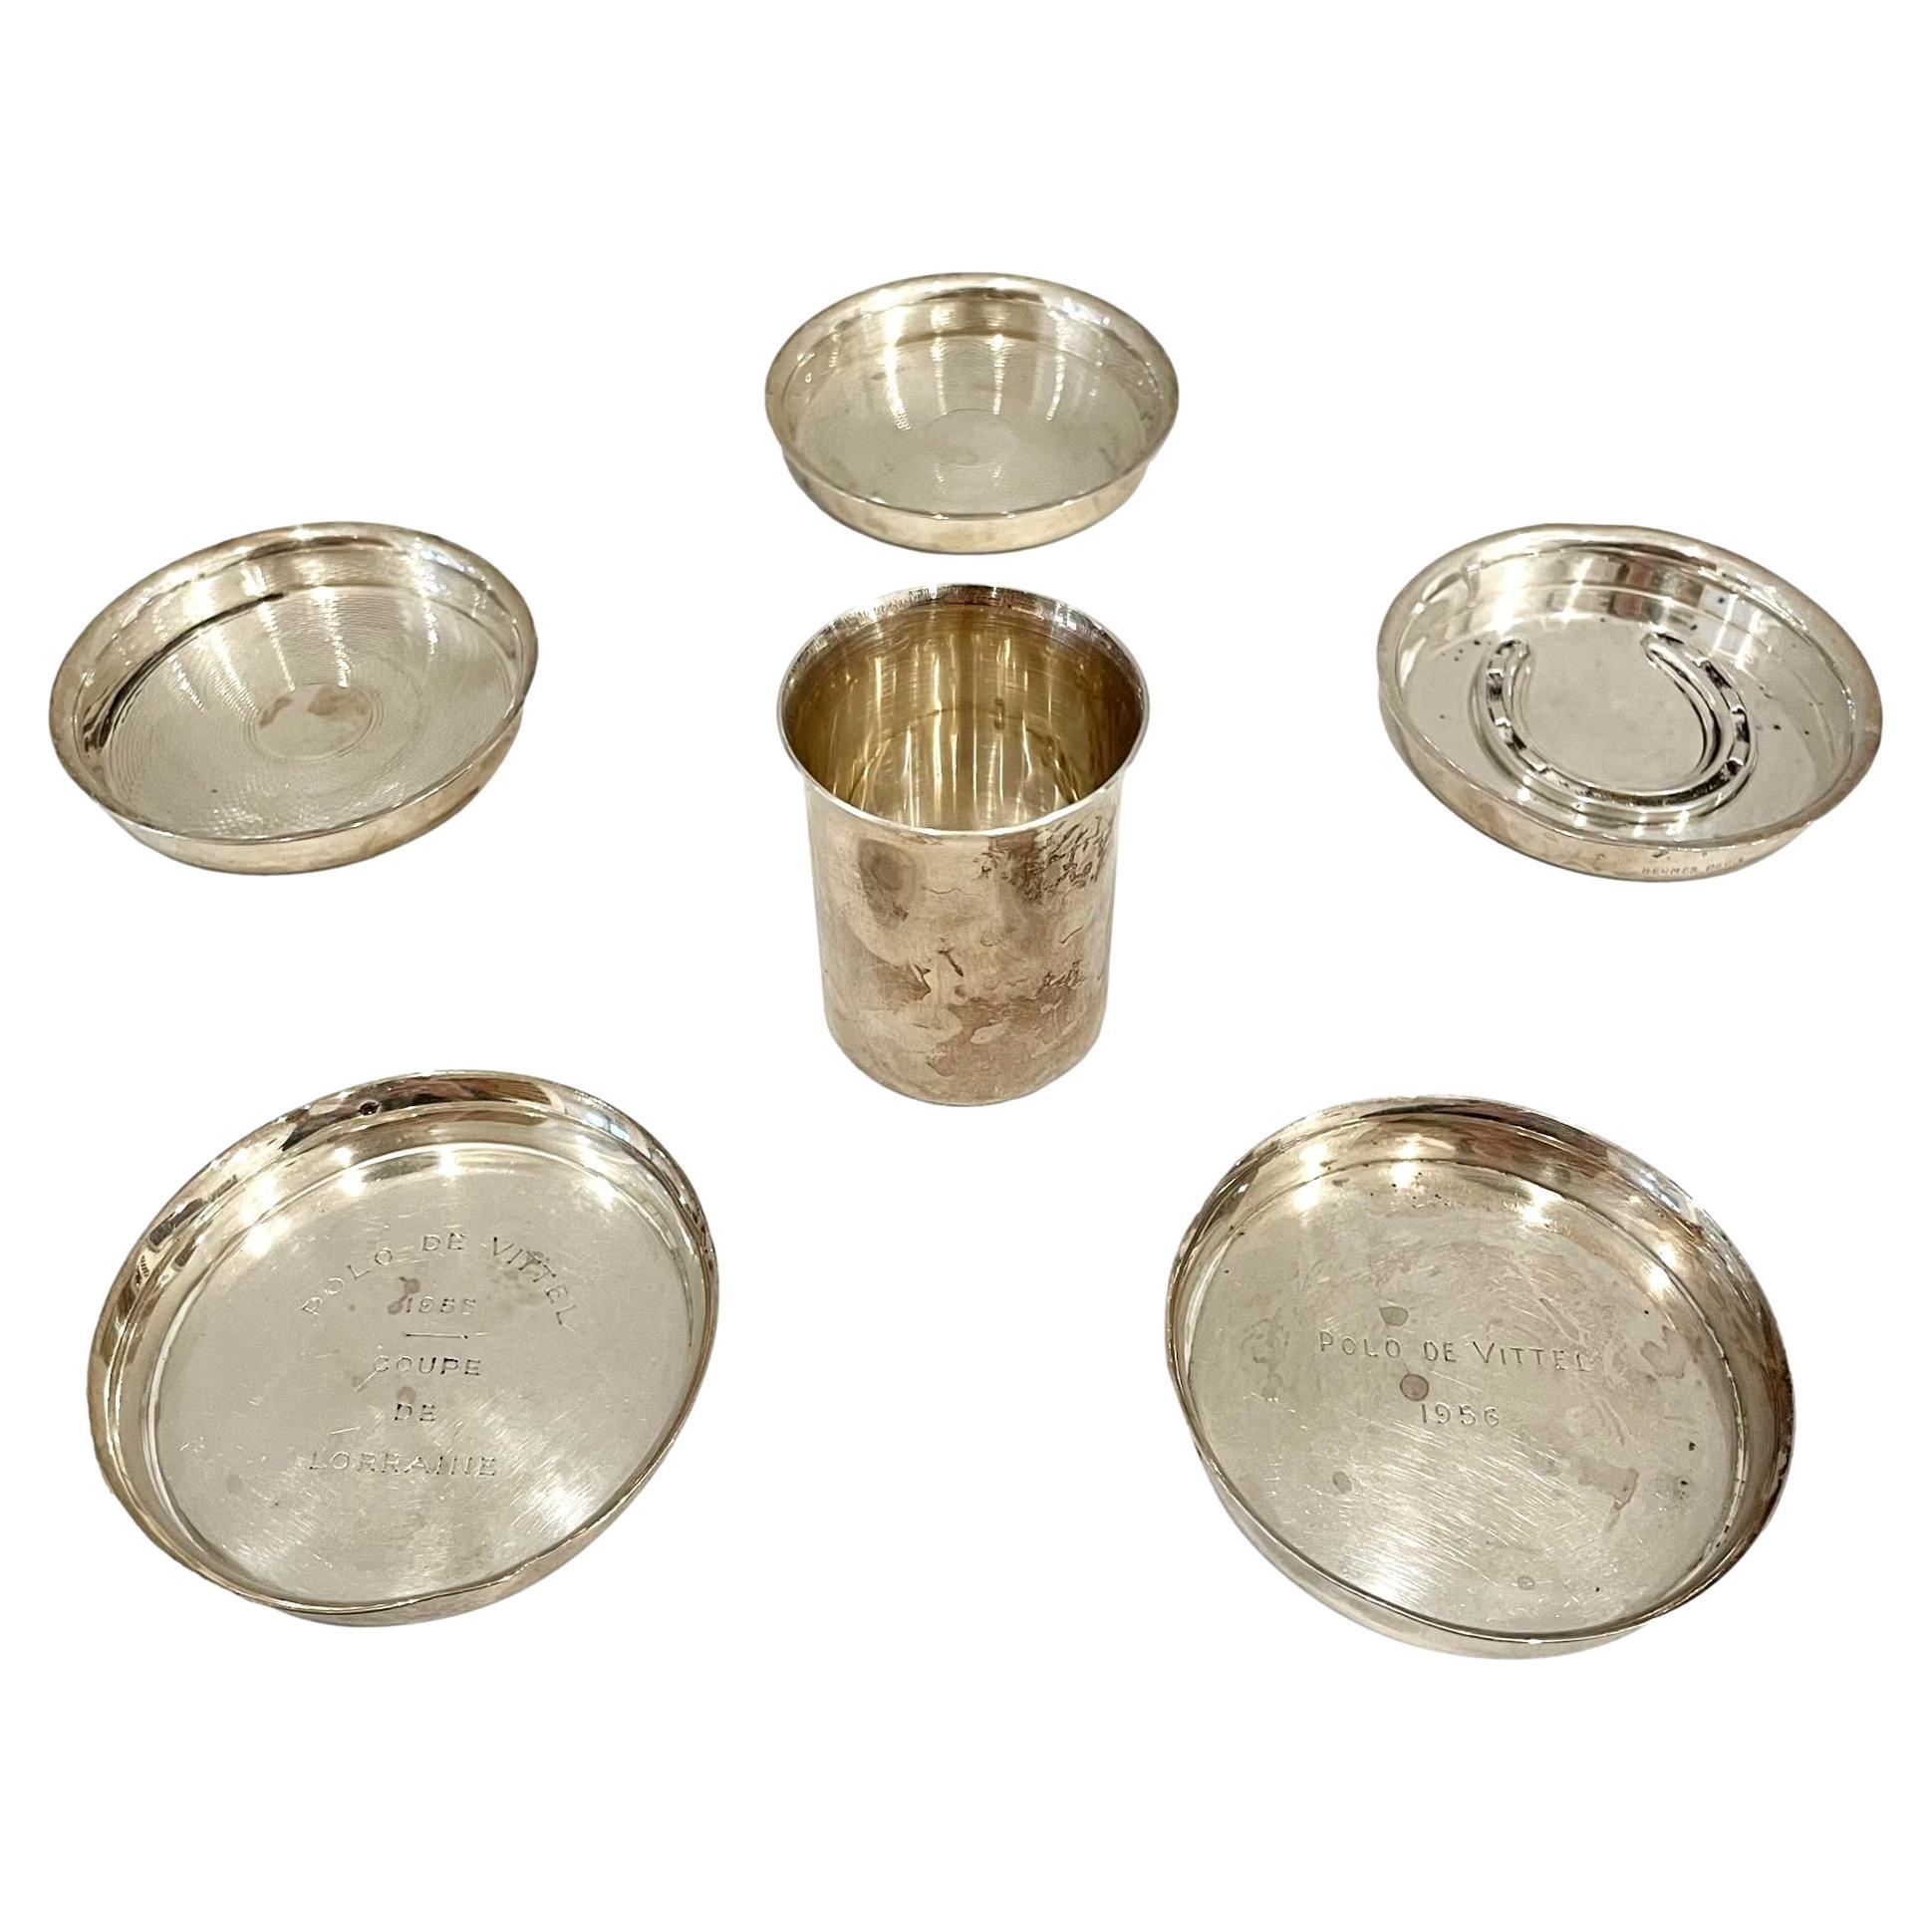 Set of 6 Hermes Silver Plated Jewelry Trays and Cup, 1950s France For Sale